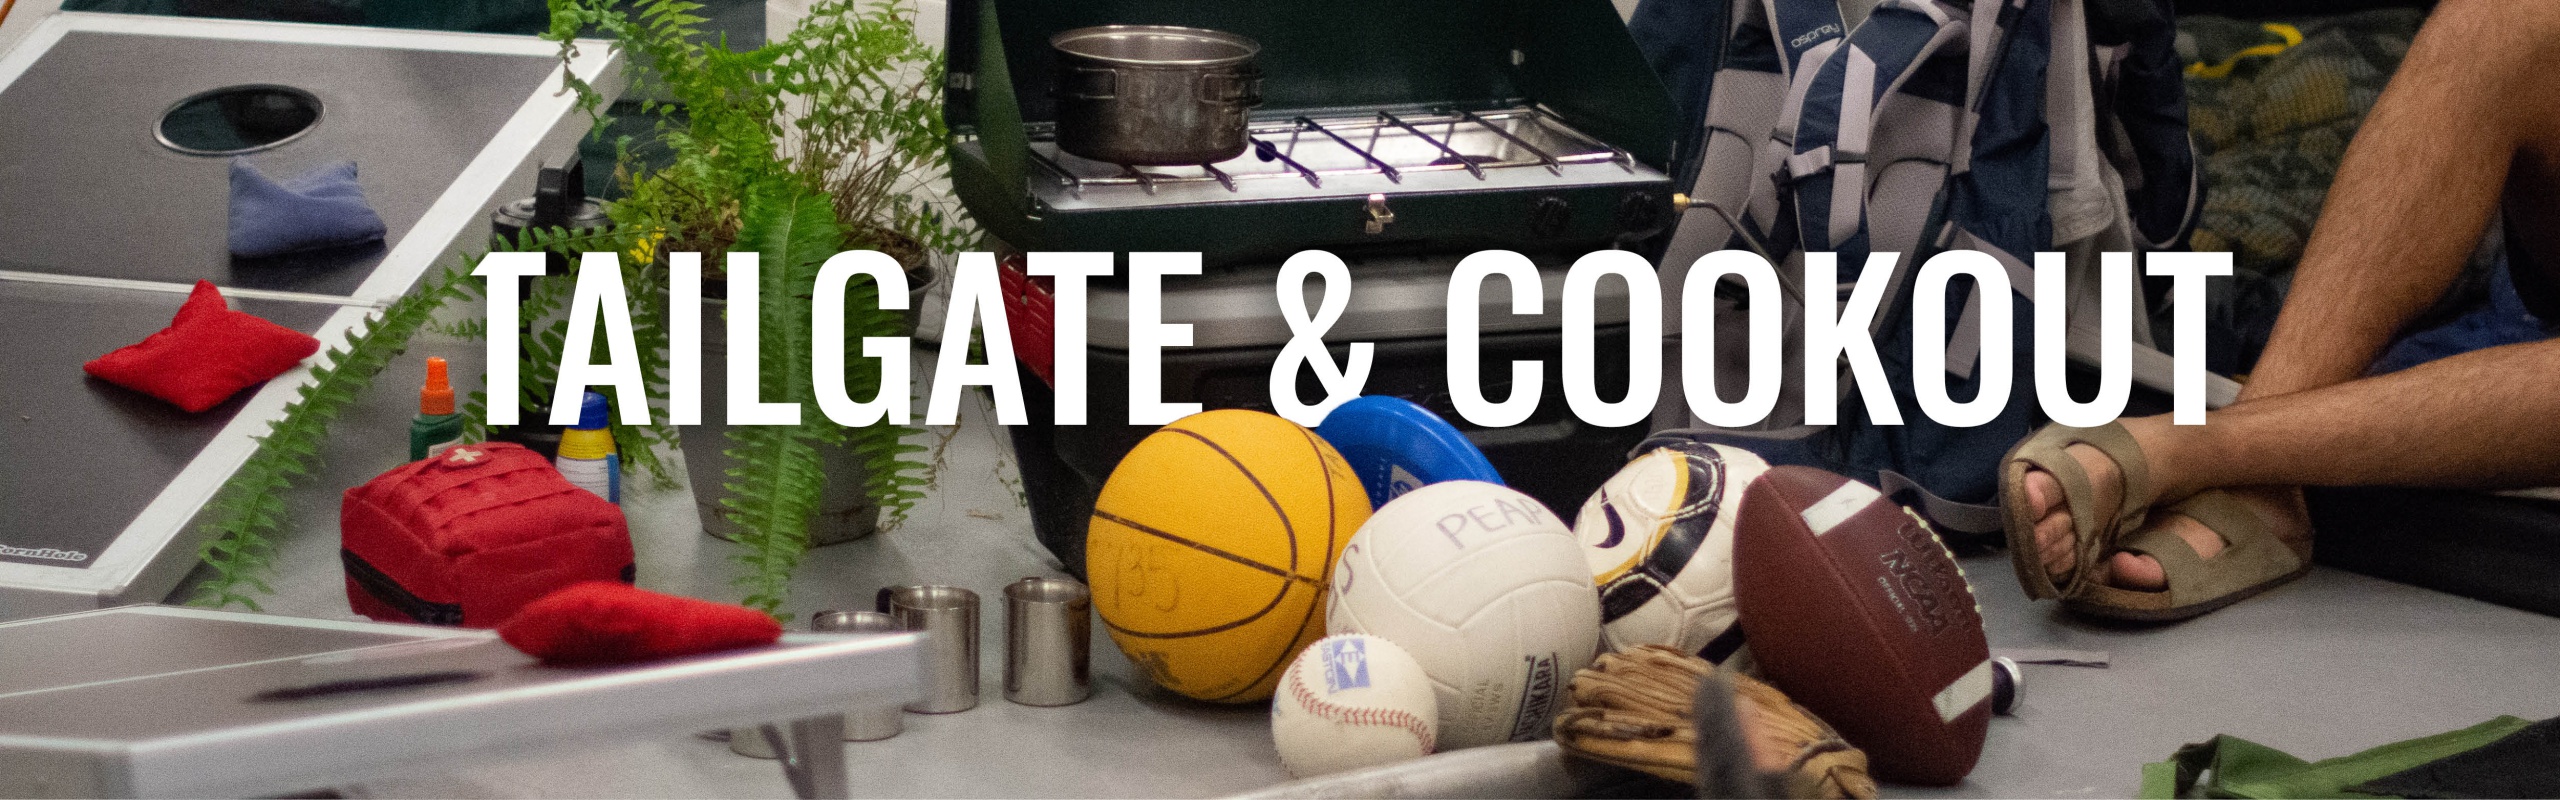 Photo taken inside the Outdoor Adventures rental center and includes a variety of sports equipment, basketball, baseball, baseball bat, football, cornhole, etc. with "Tailgate & Cookout" written in the background.